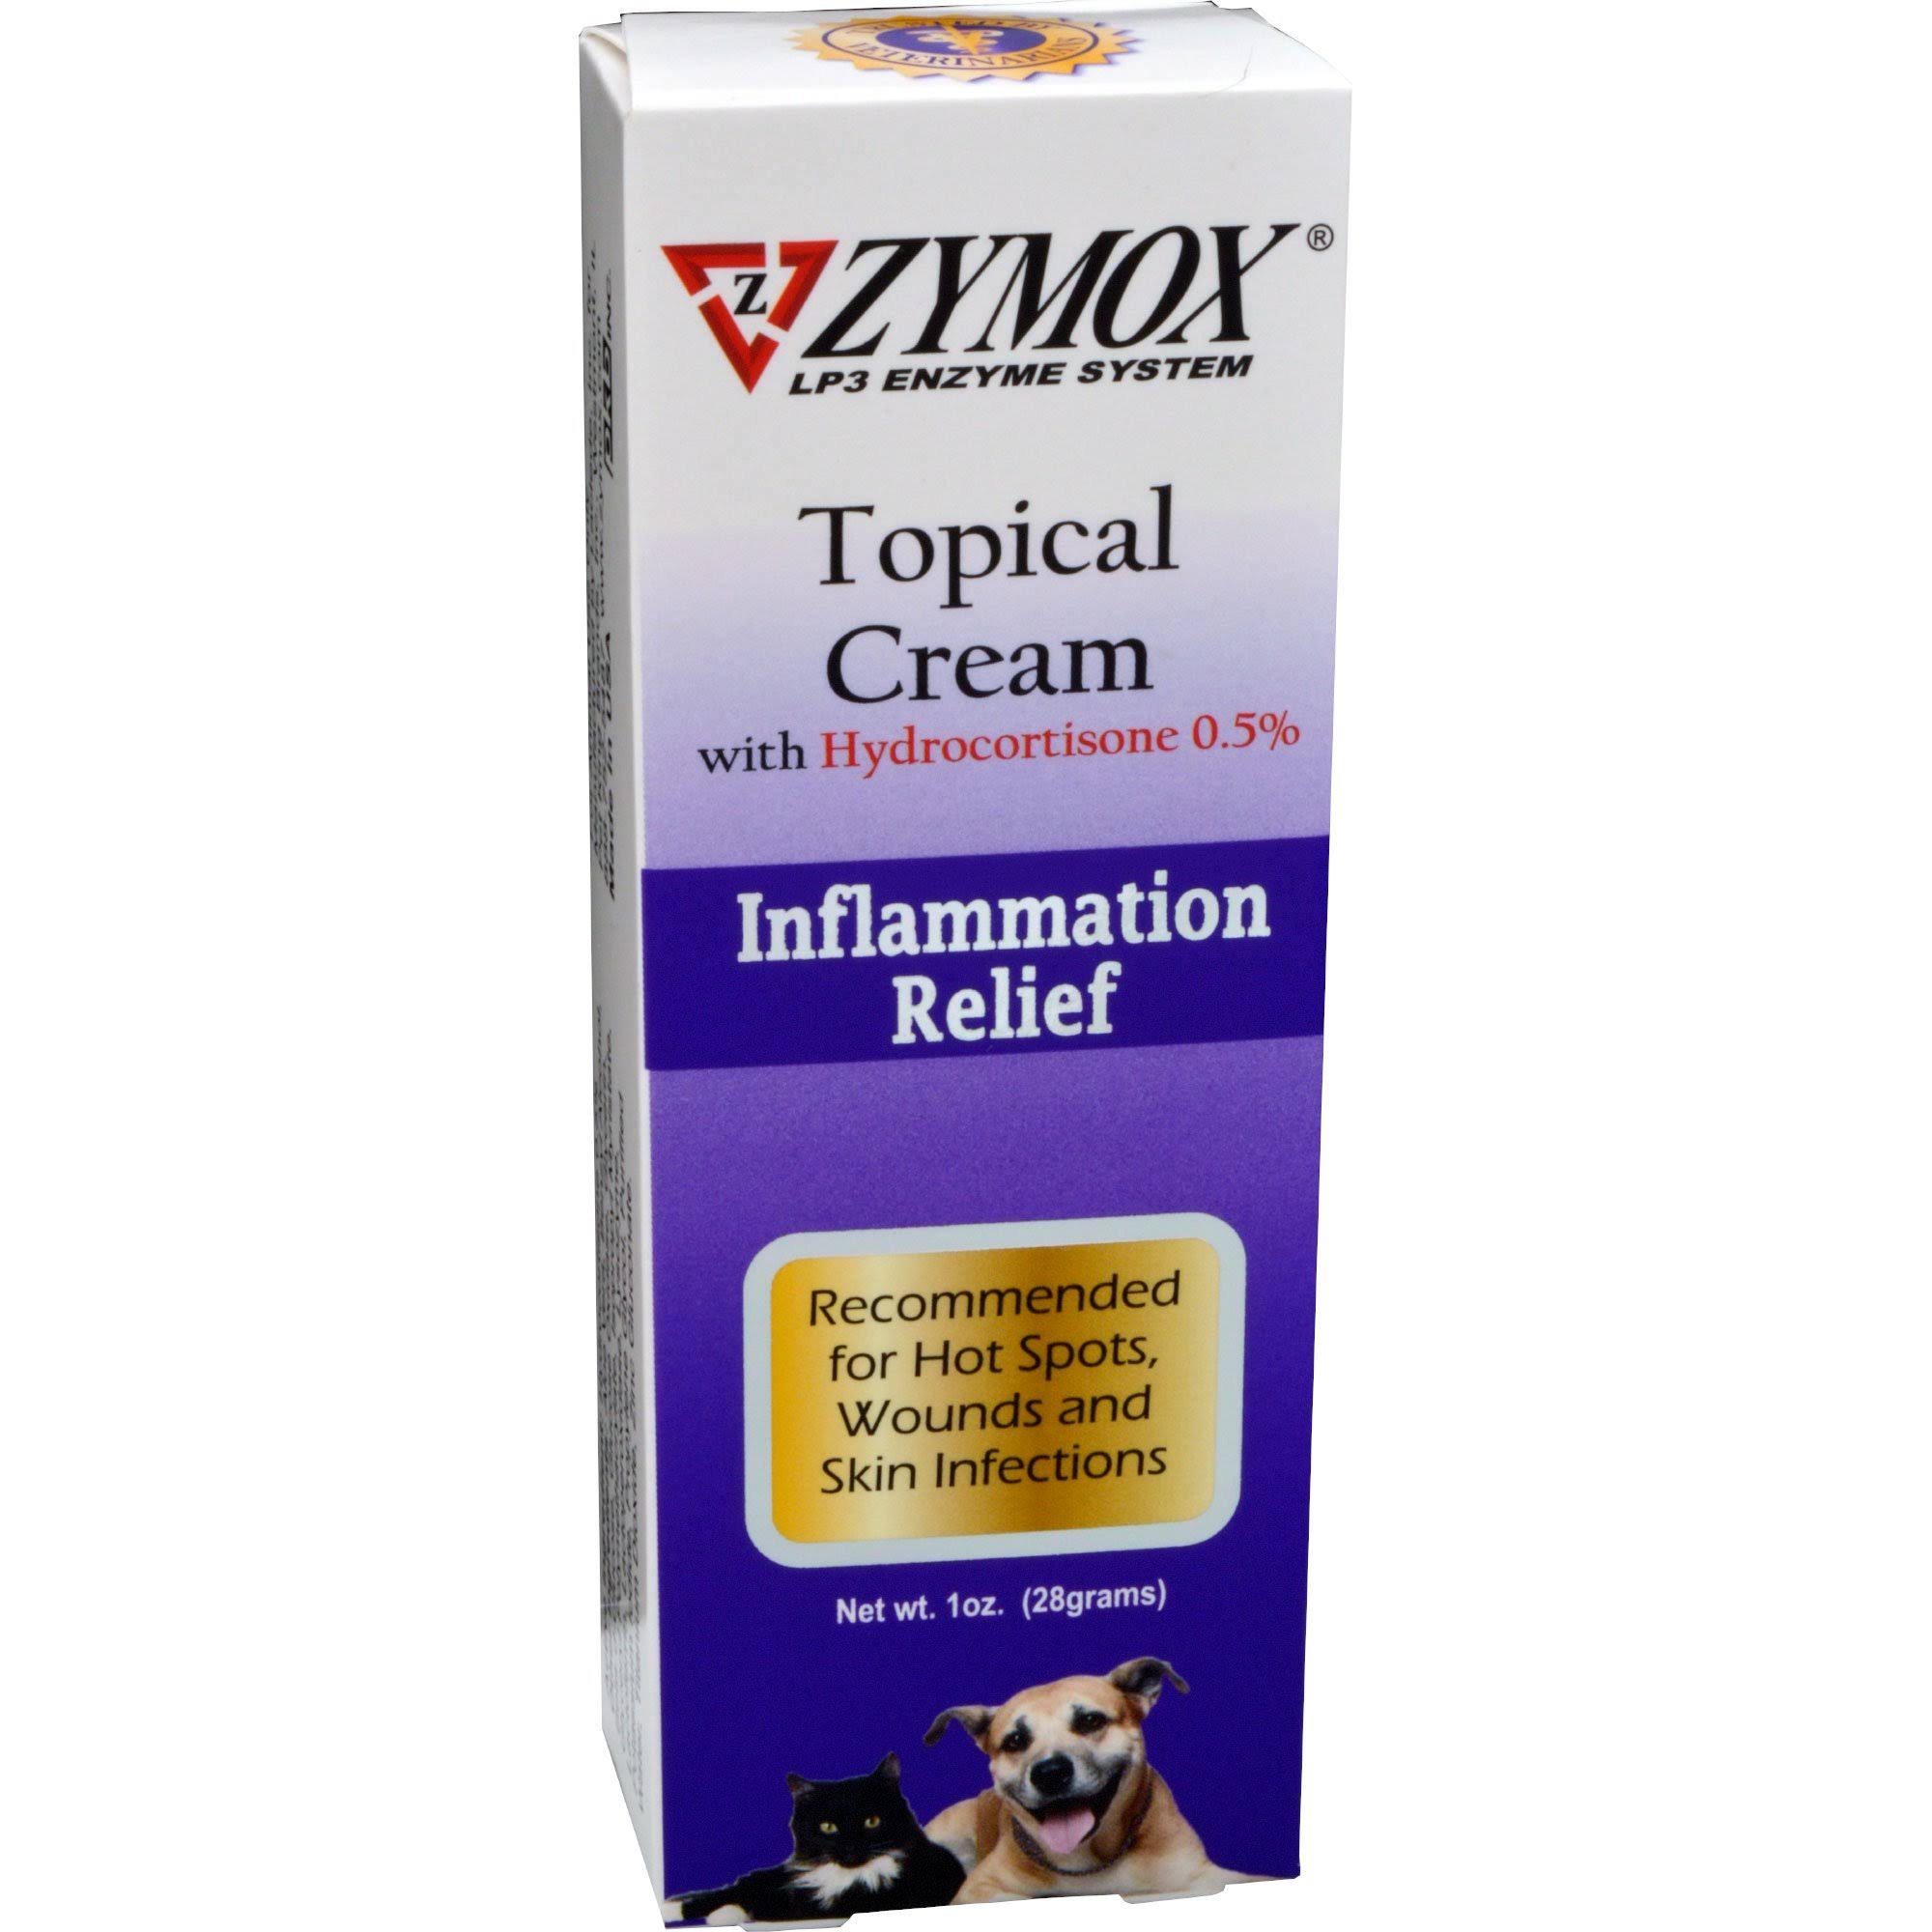 Zymox Pet Topical Cream - Antimicrobial and Inflammation Relief, 1oz